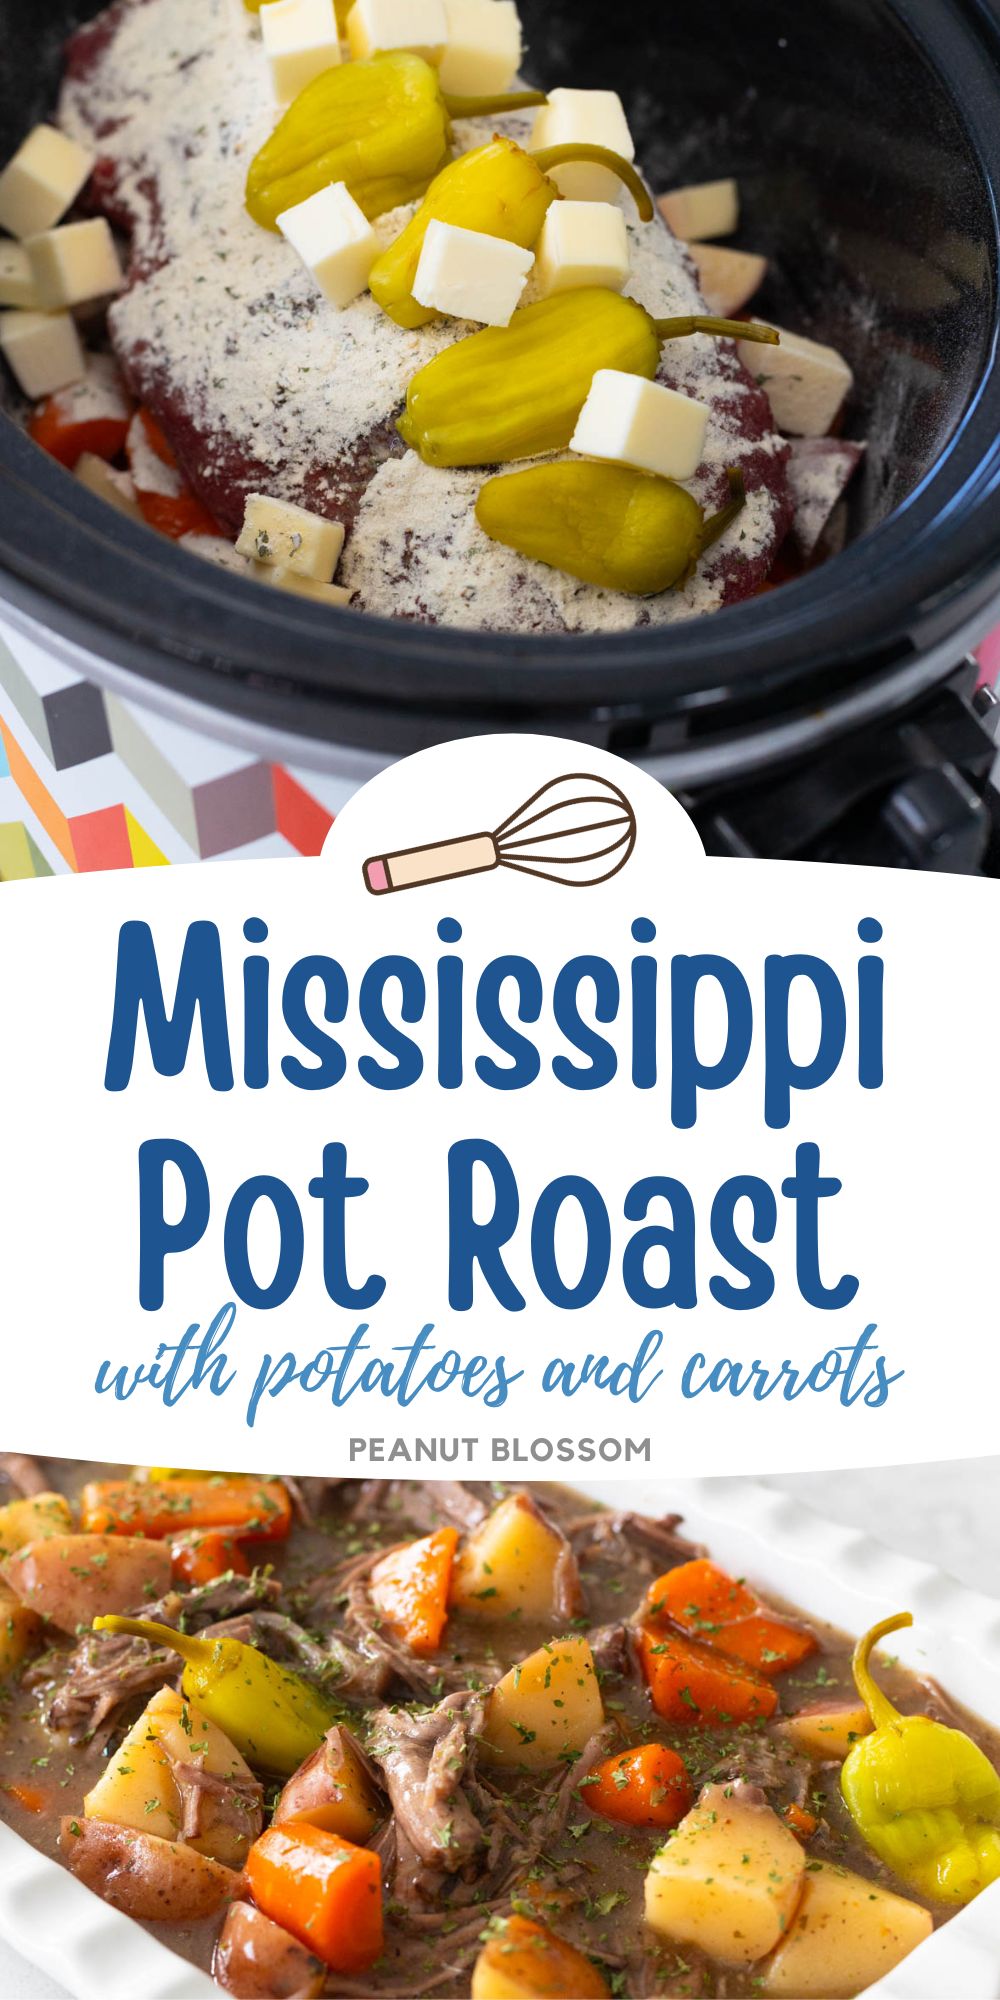 The photo collage shows the Mississippi pot roast cooking in a Crock Pot next to a photo of the serving dish that shows the chunks of potatoes and carrots that cooked with it.